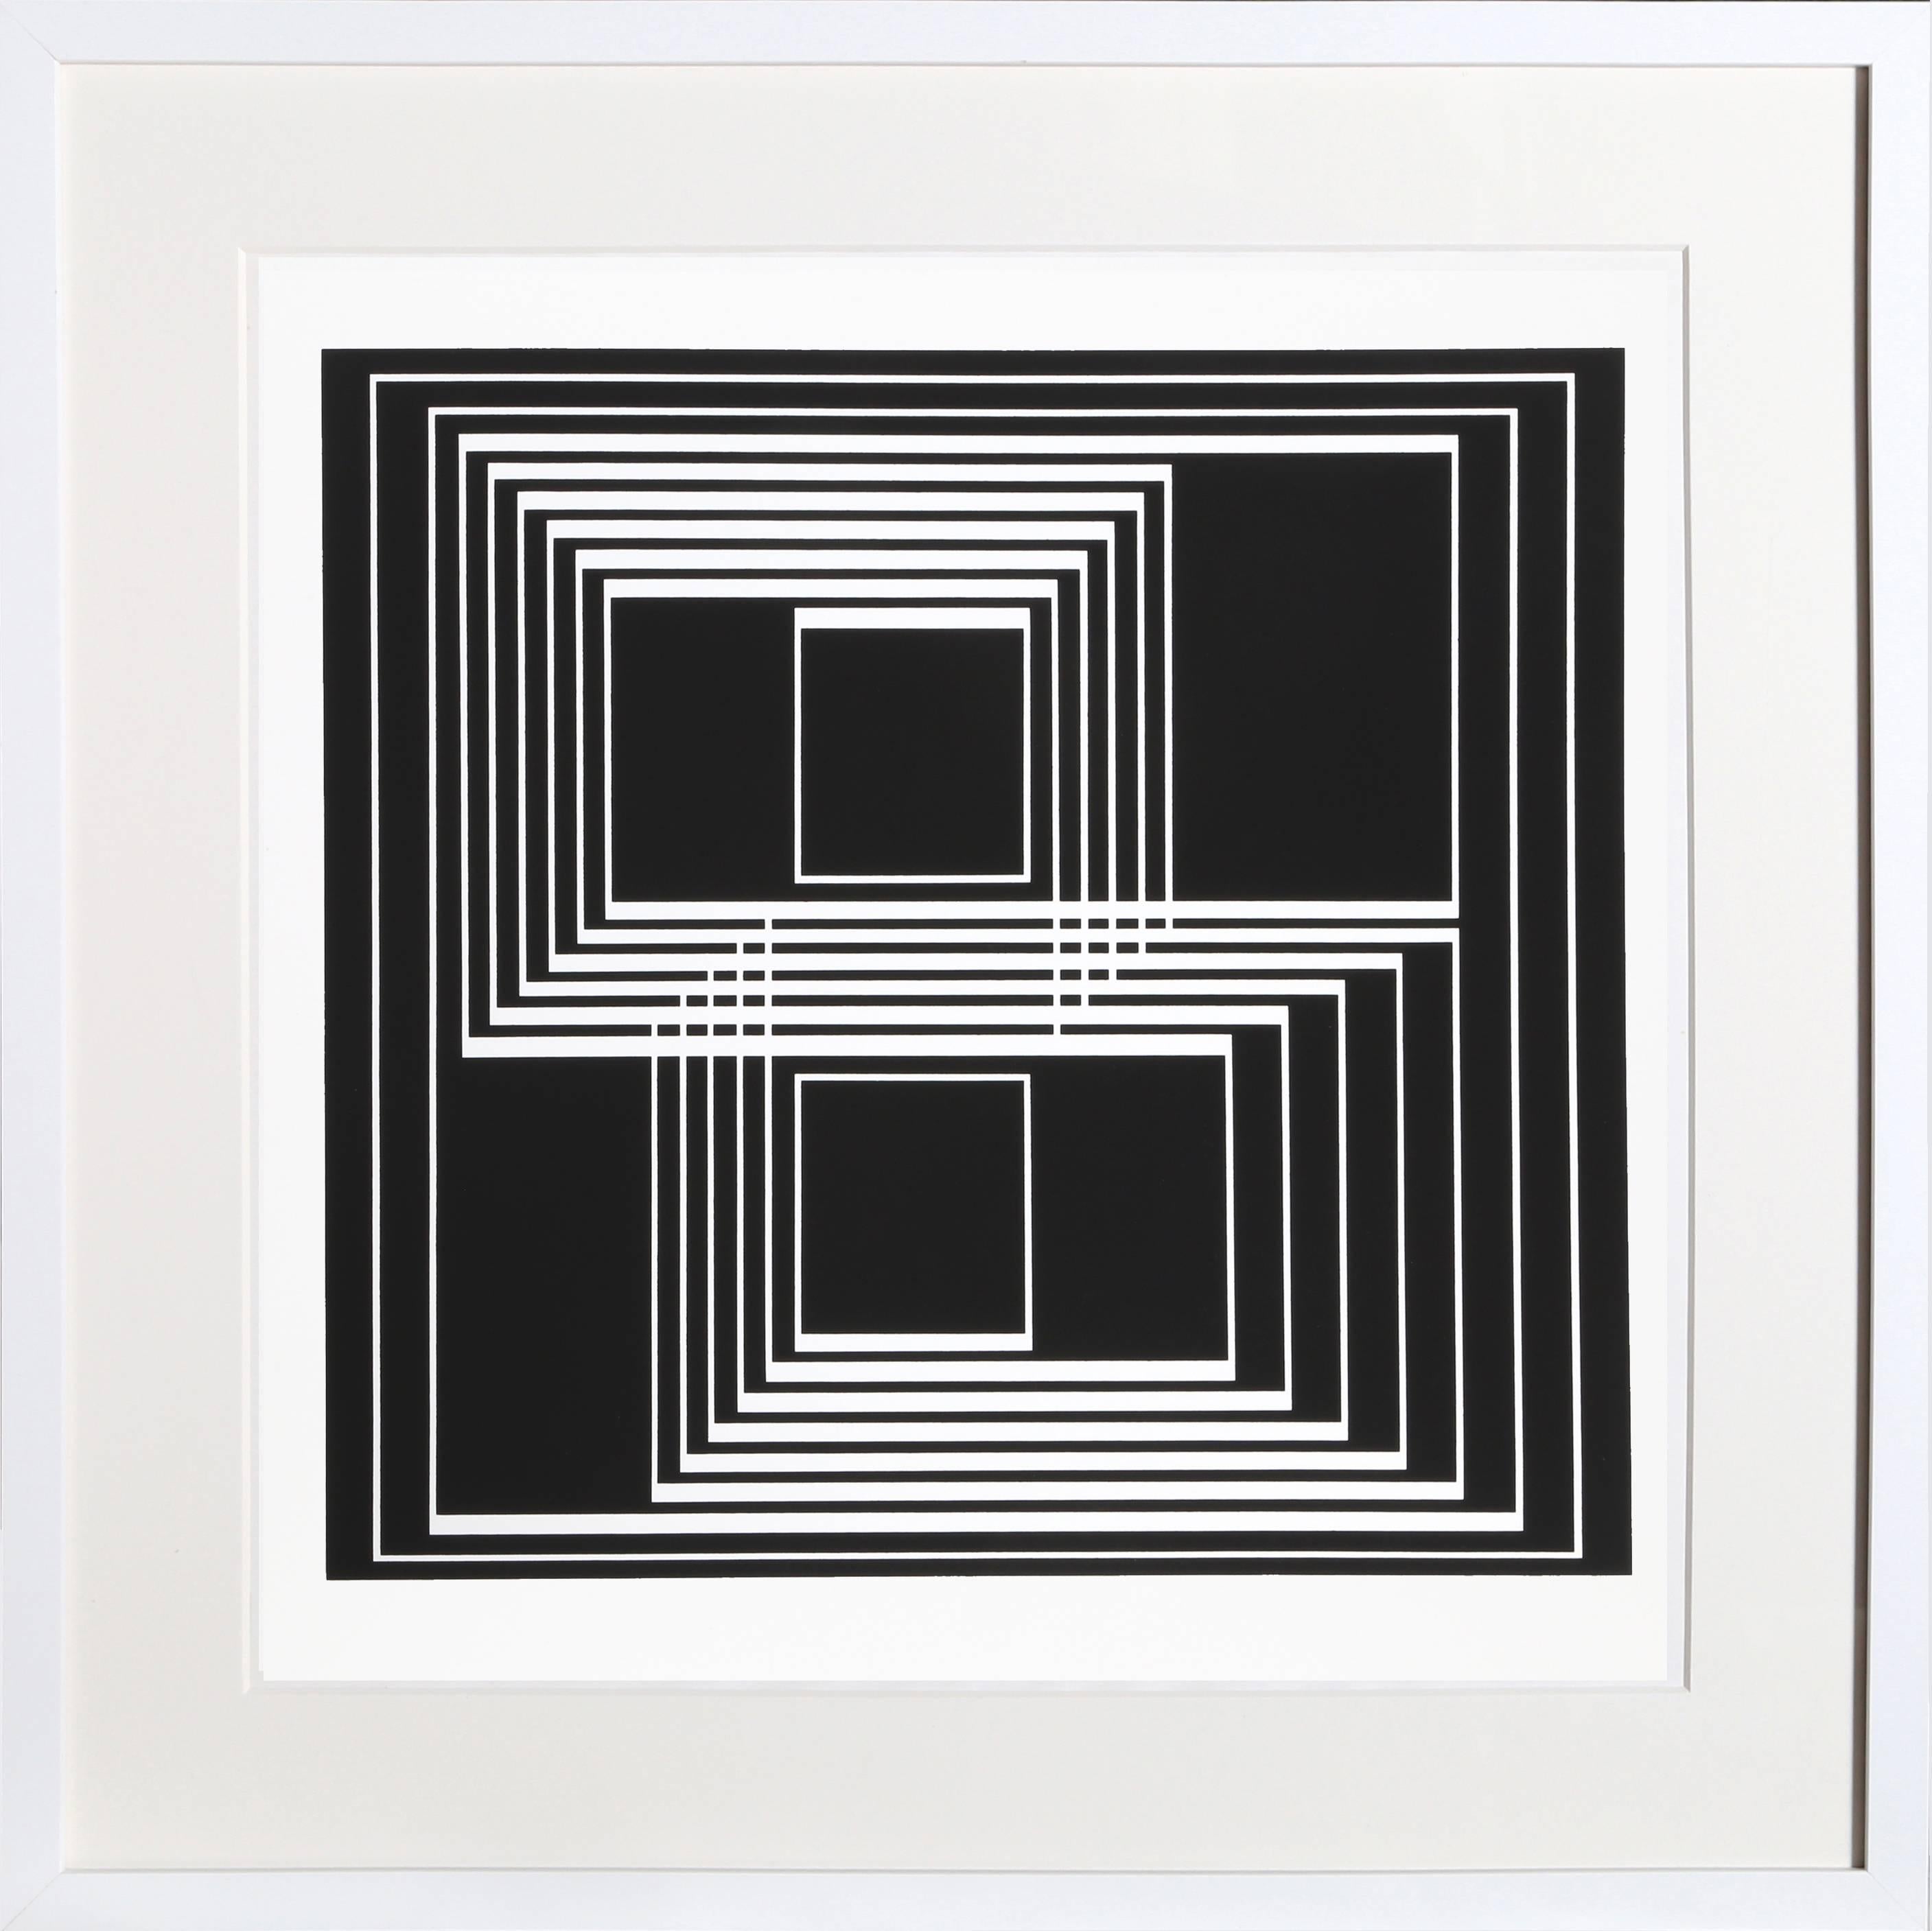 Josef Albers Abstract Print - untitled from Formulation: Articulation